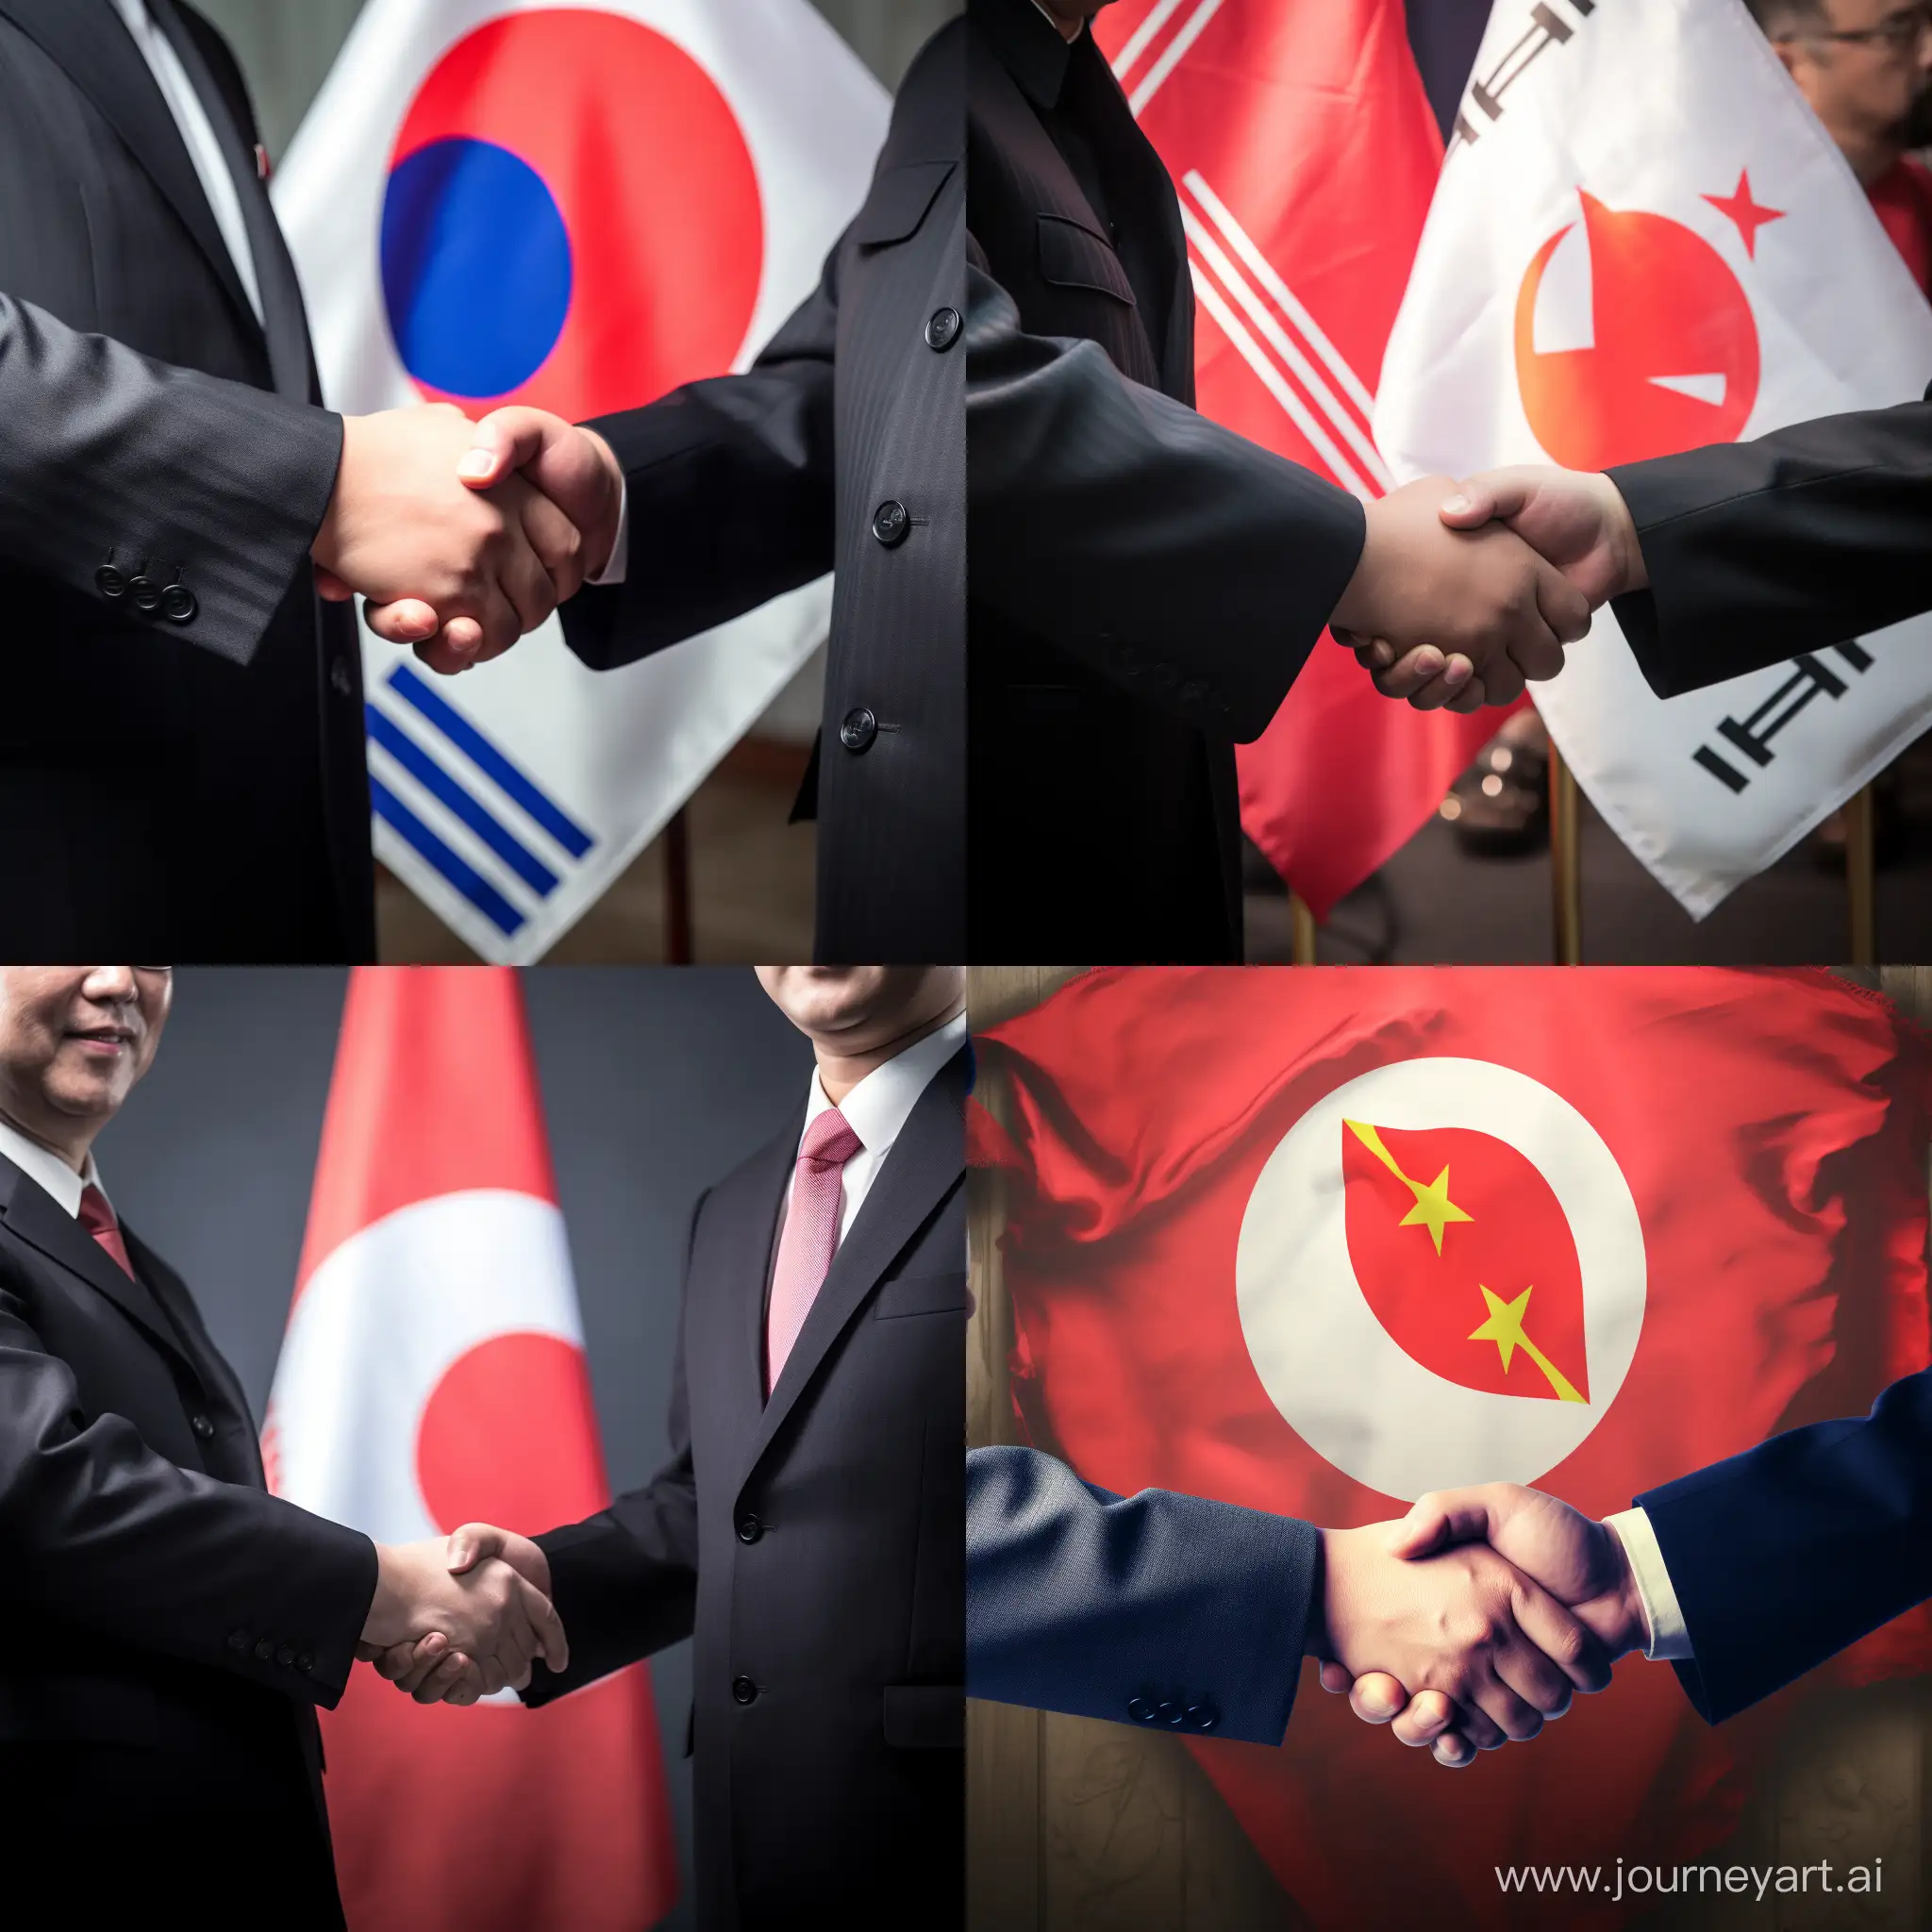 The flag of Iran and North Korea next to each other shaking hands